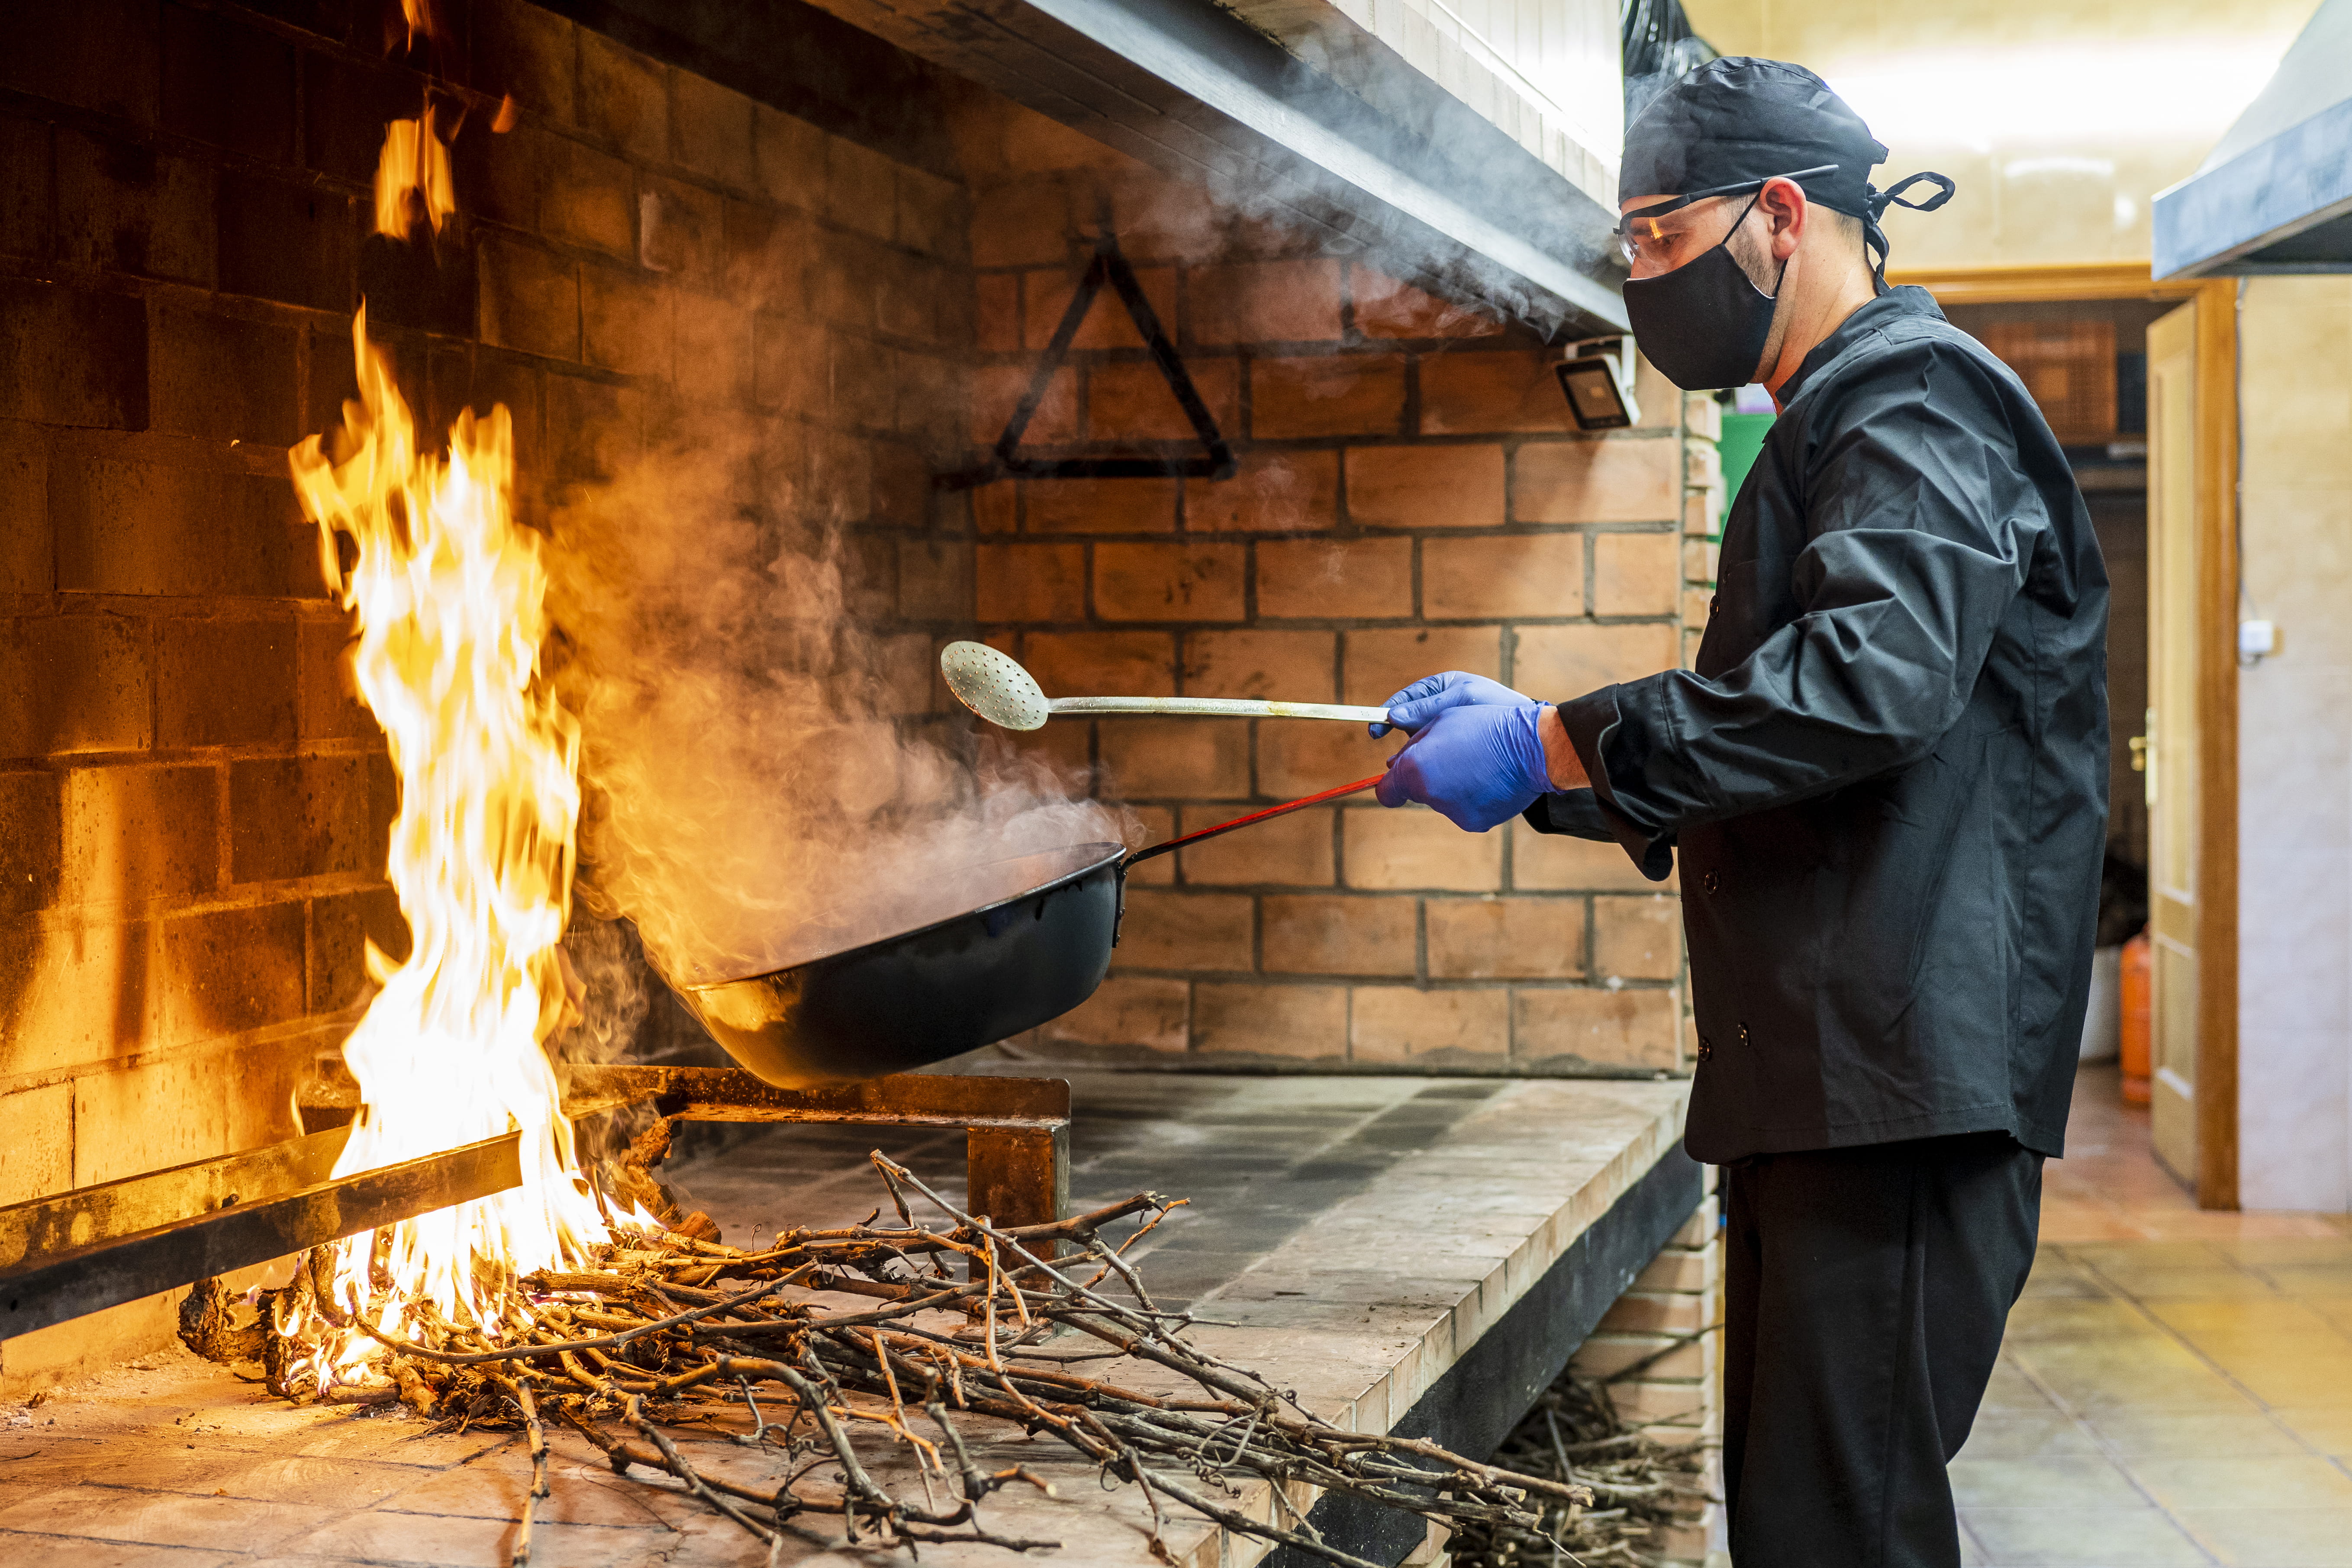 Professional chef wearing mask cooking paella outside kitchen on an open fire 